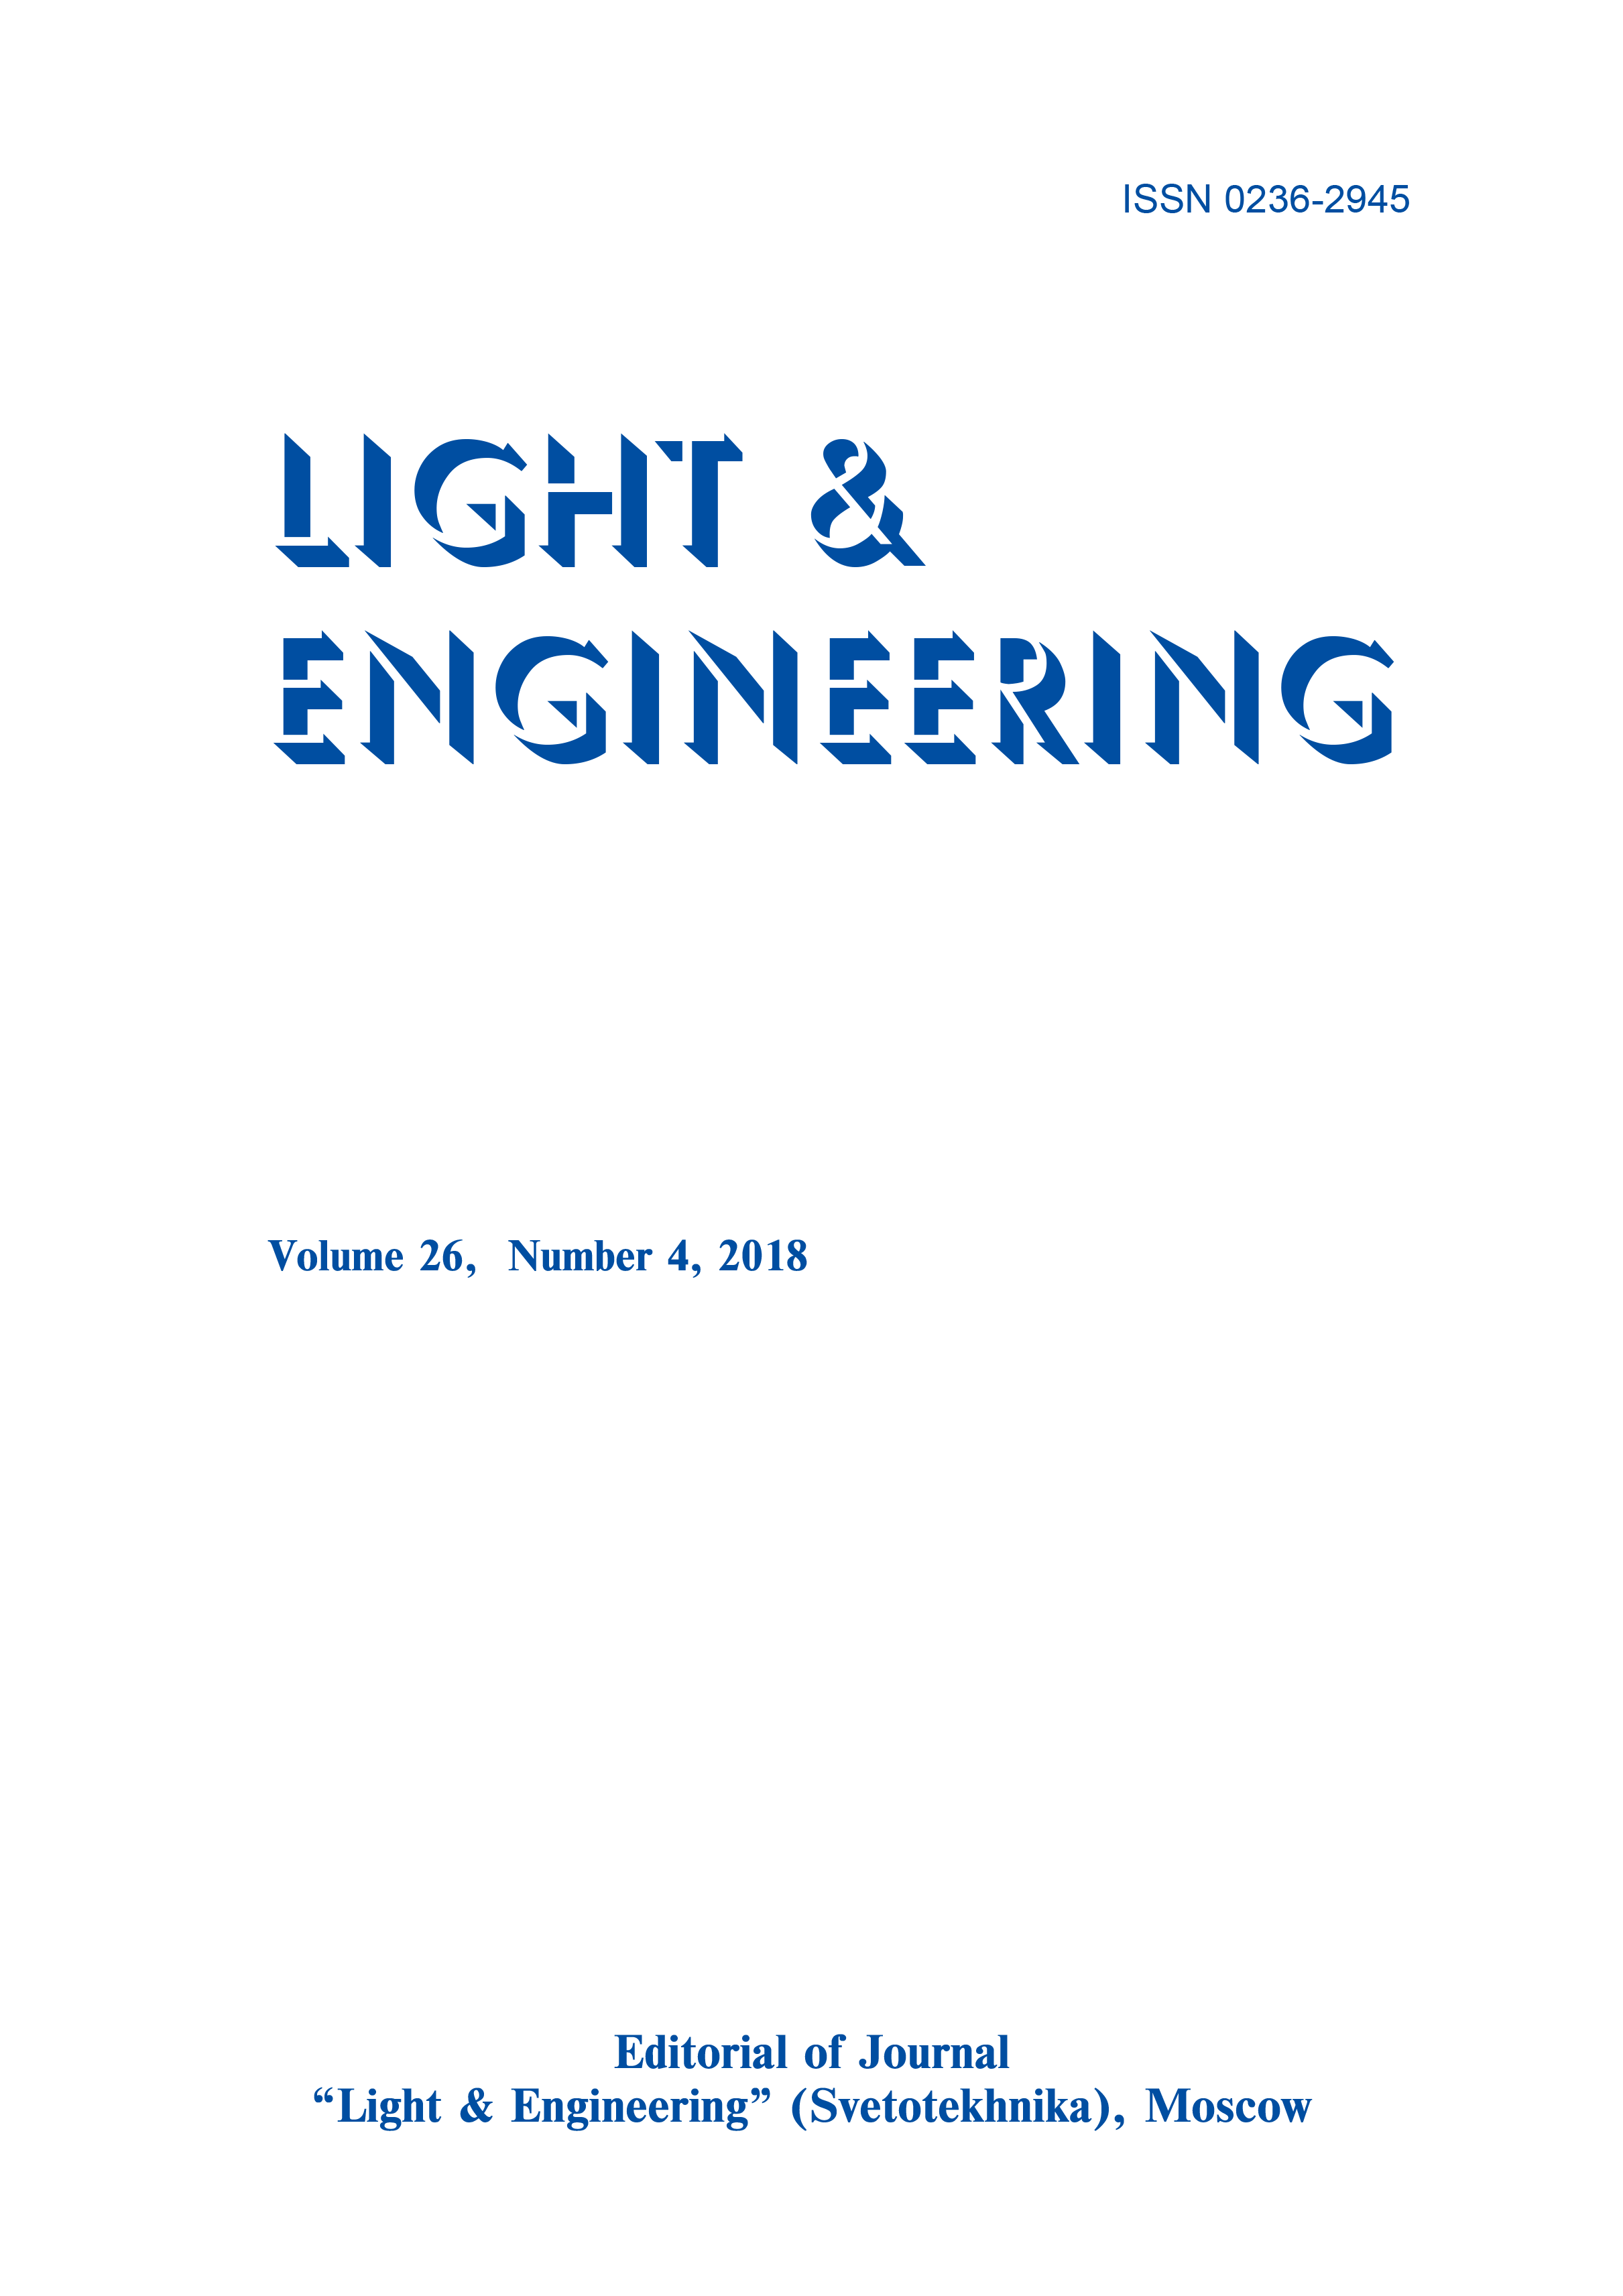 The Experience of China’s LED Lighting Industry’s Development. L&E 26 (4) 2018